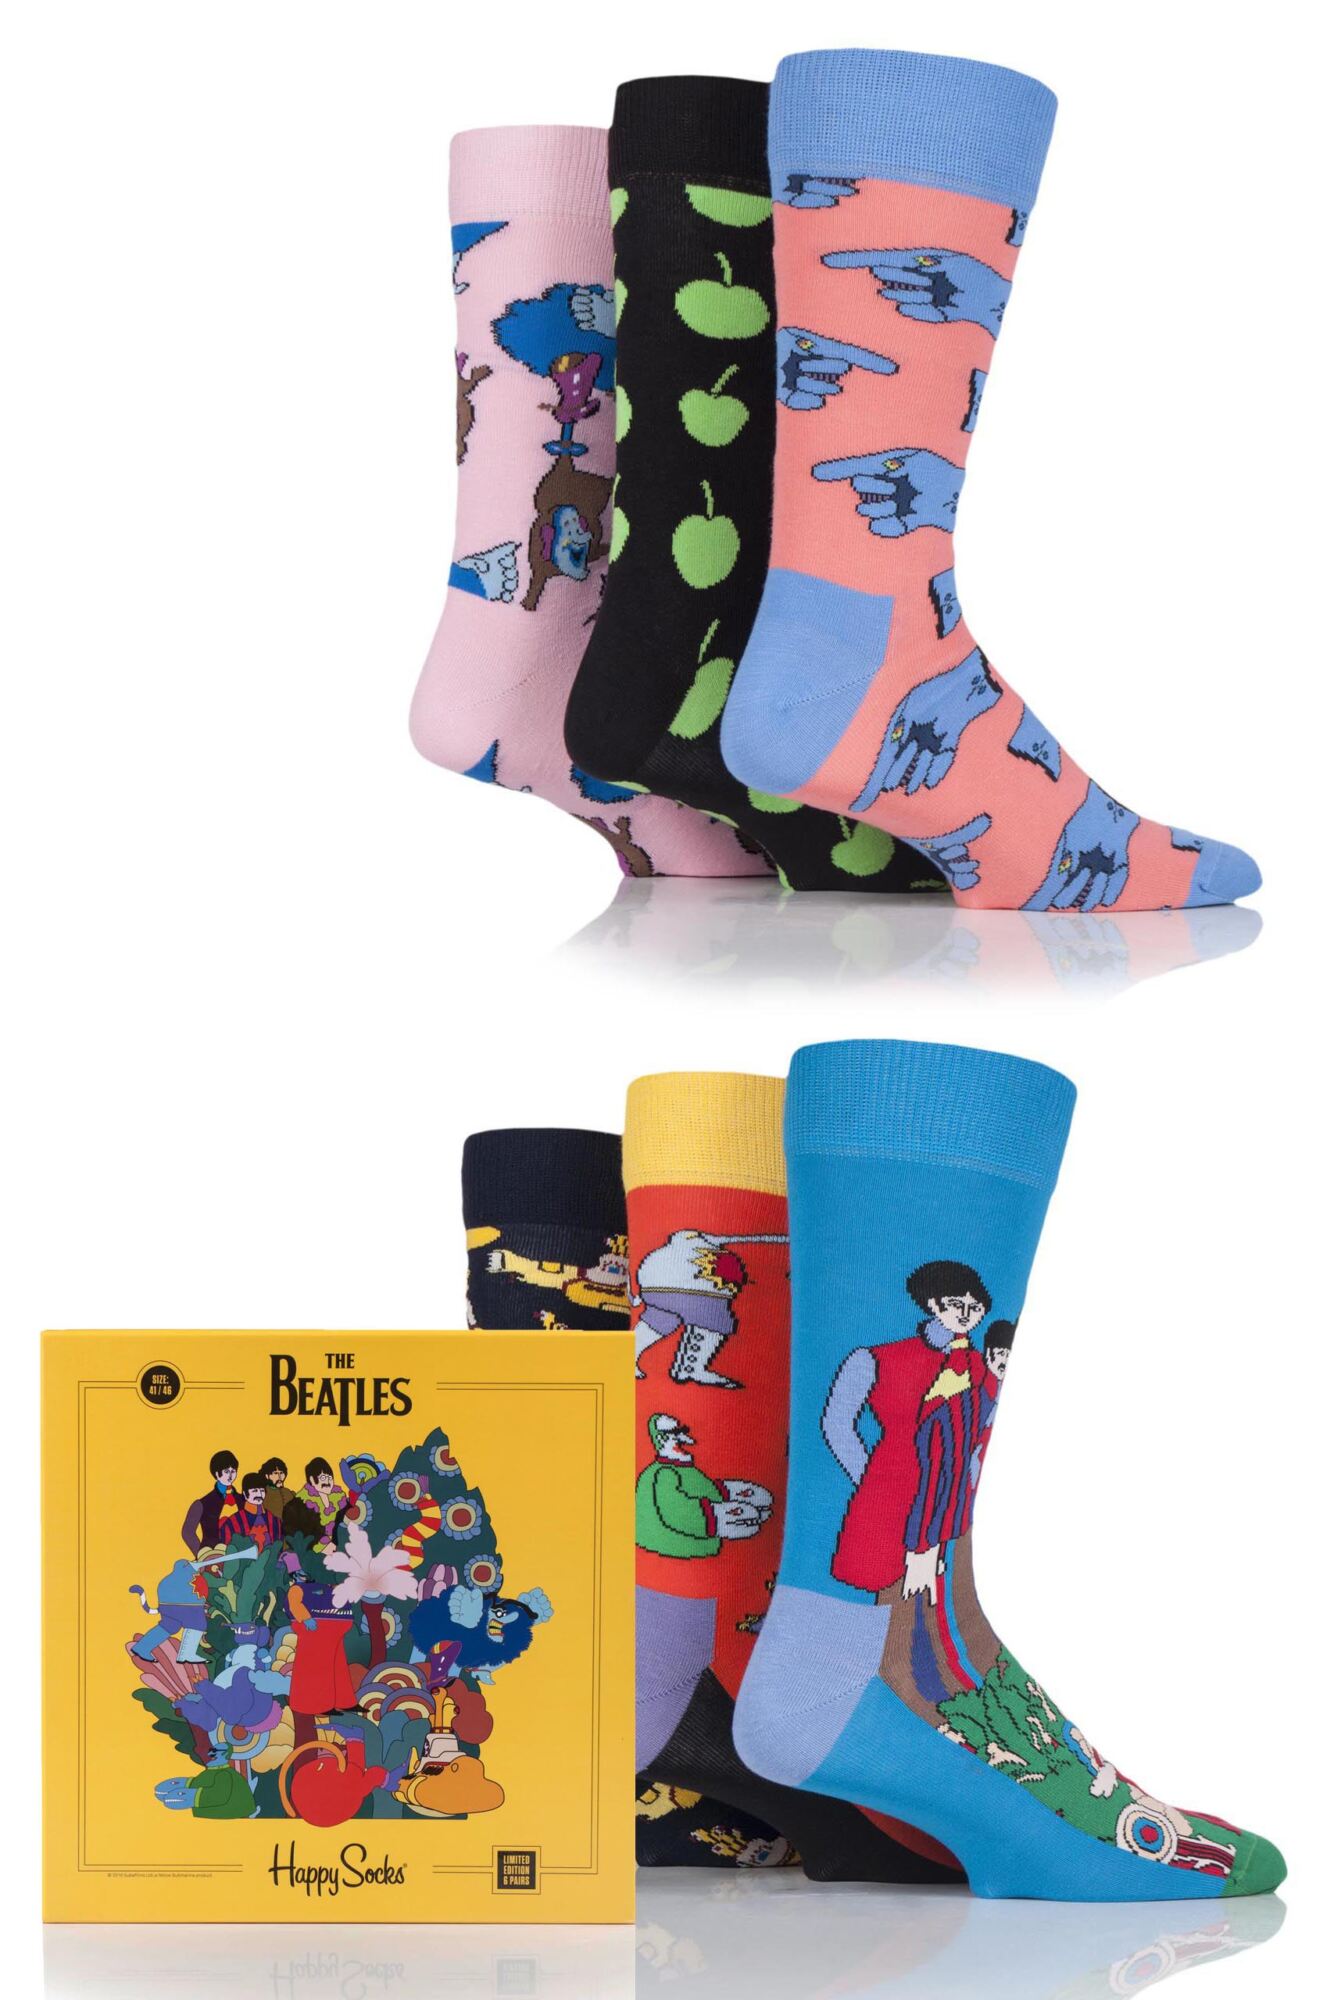 6 Pair and The Beatles LP Collector's Box Cotton Socks Gift Box Unisex - Happy Socks